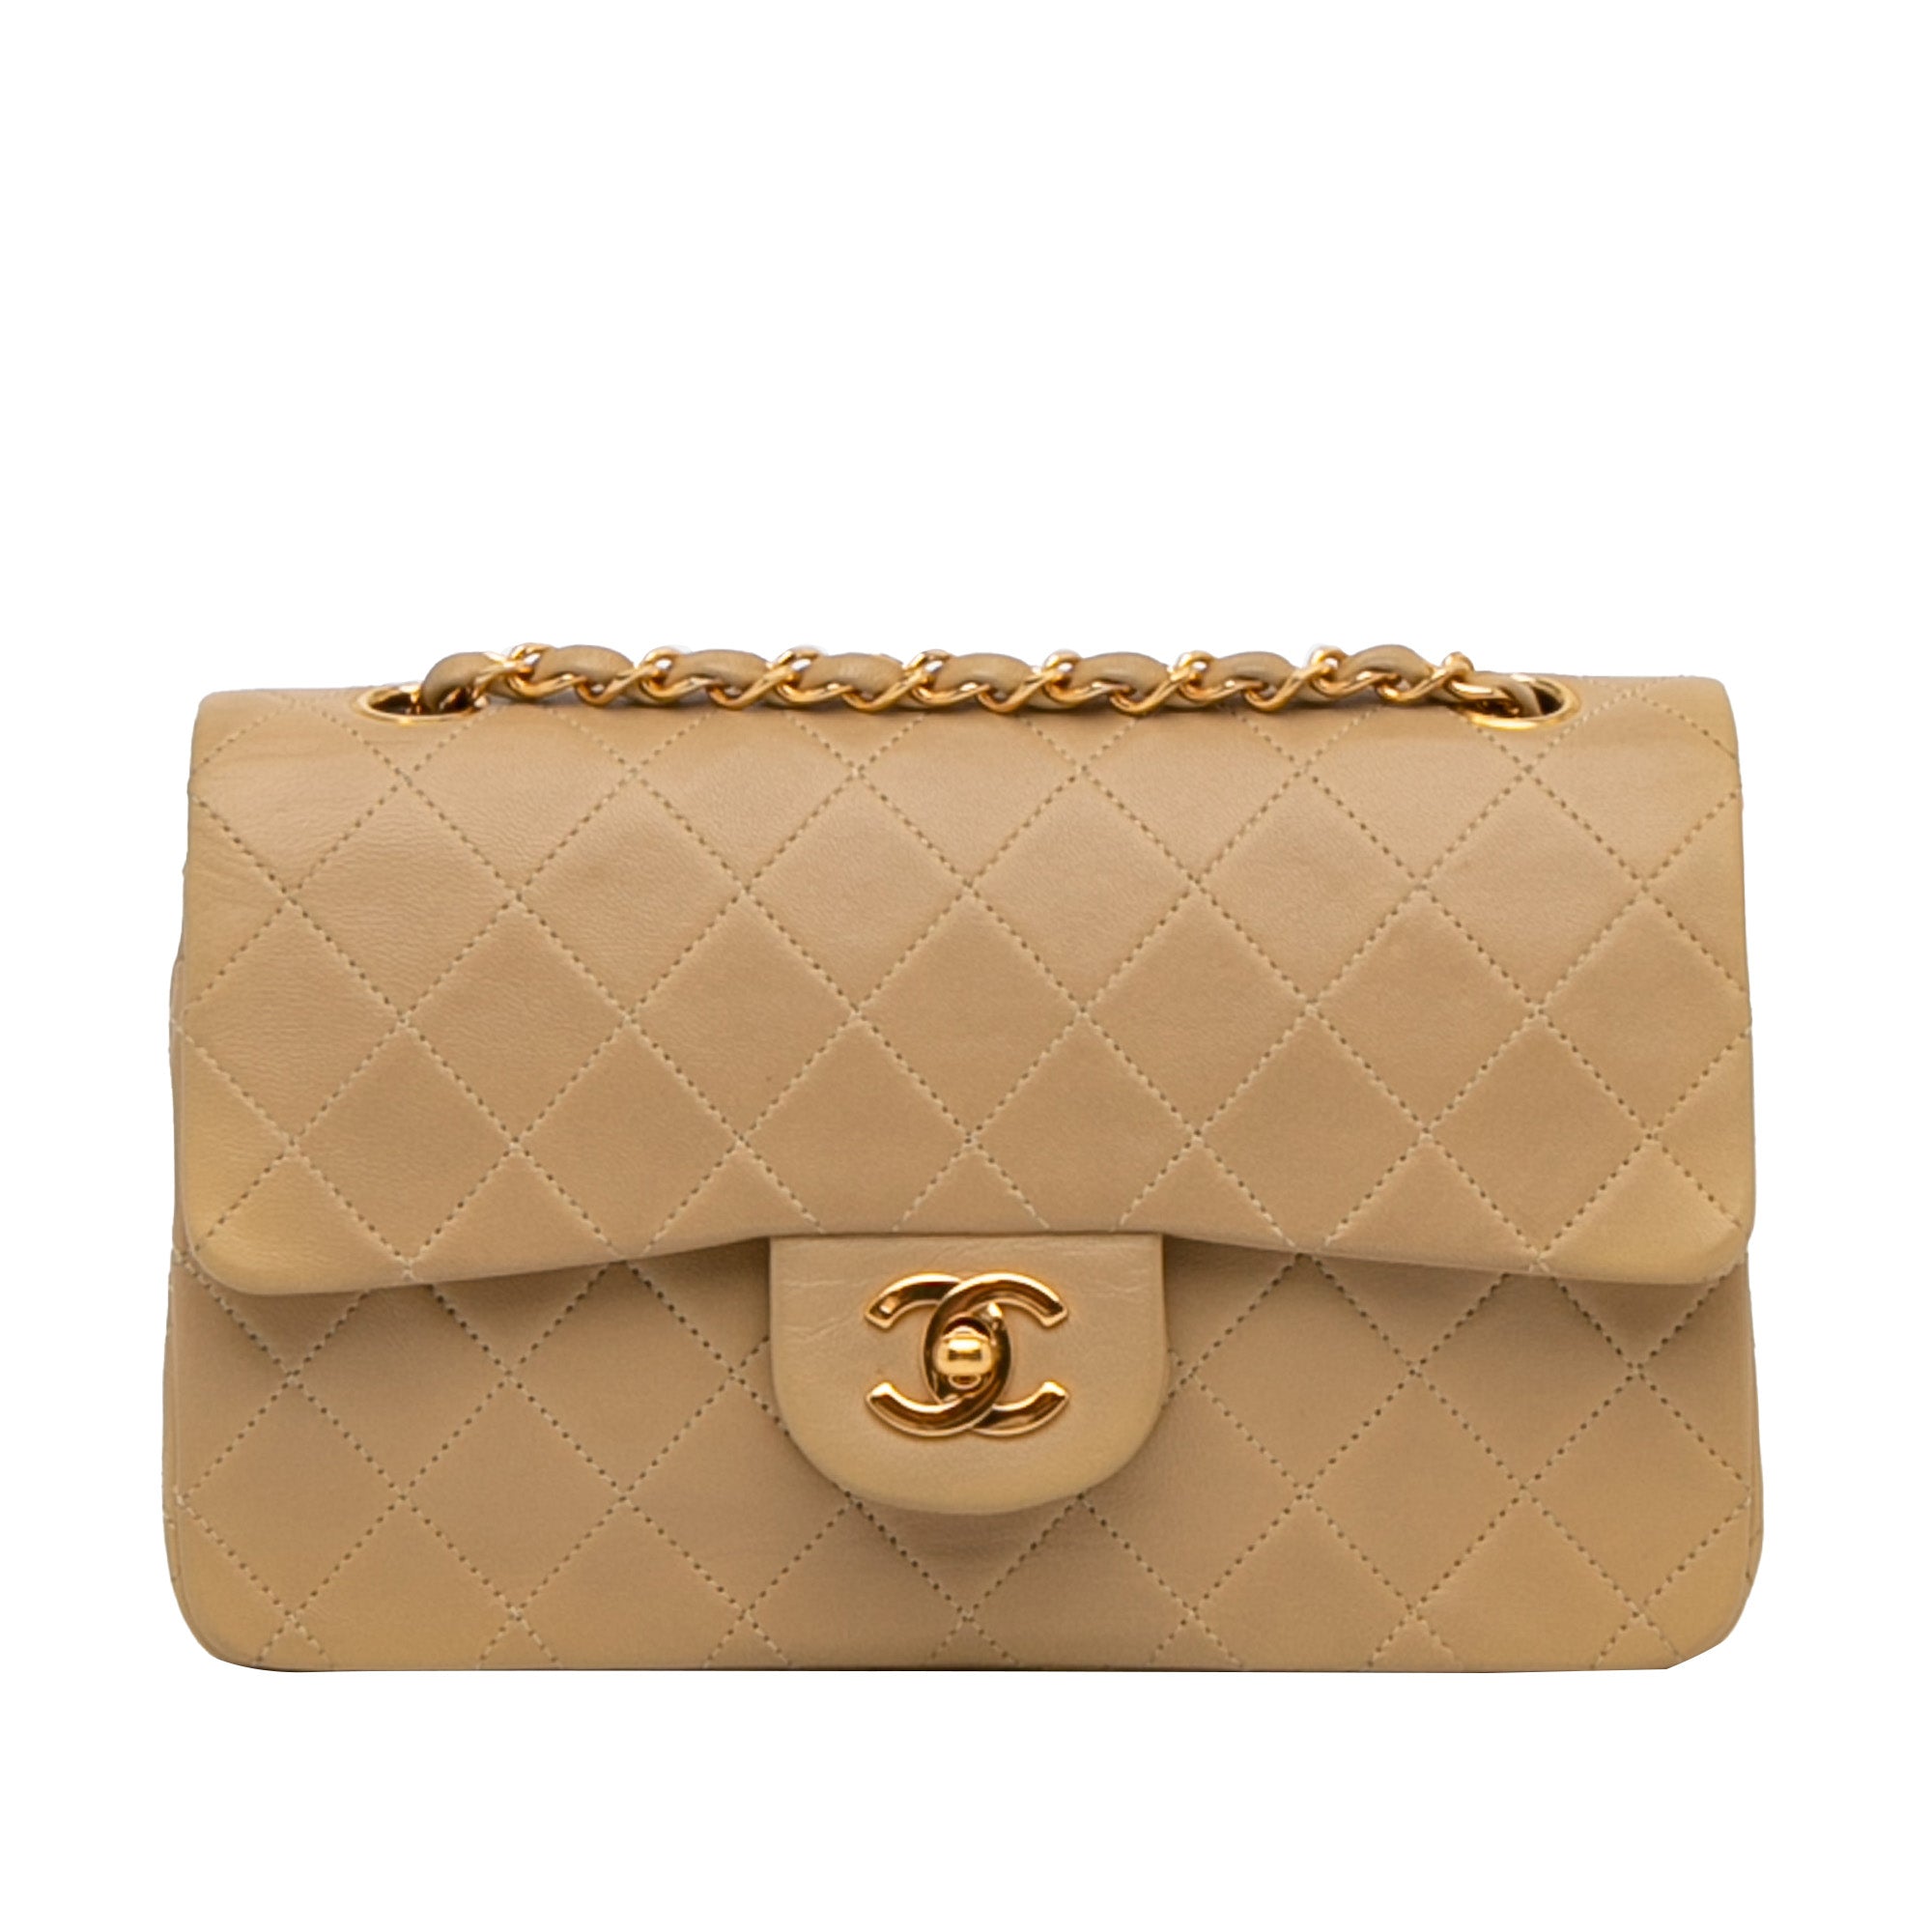 Pre-owned Chanel Beige Leather Small Classic Double Flap Shoulder Bag